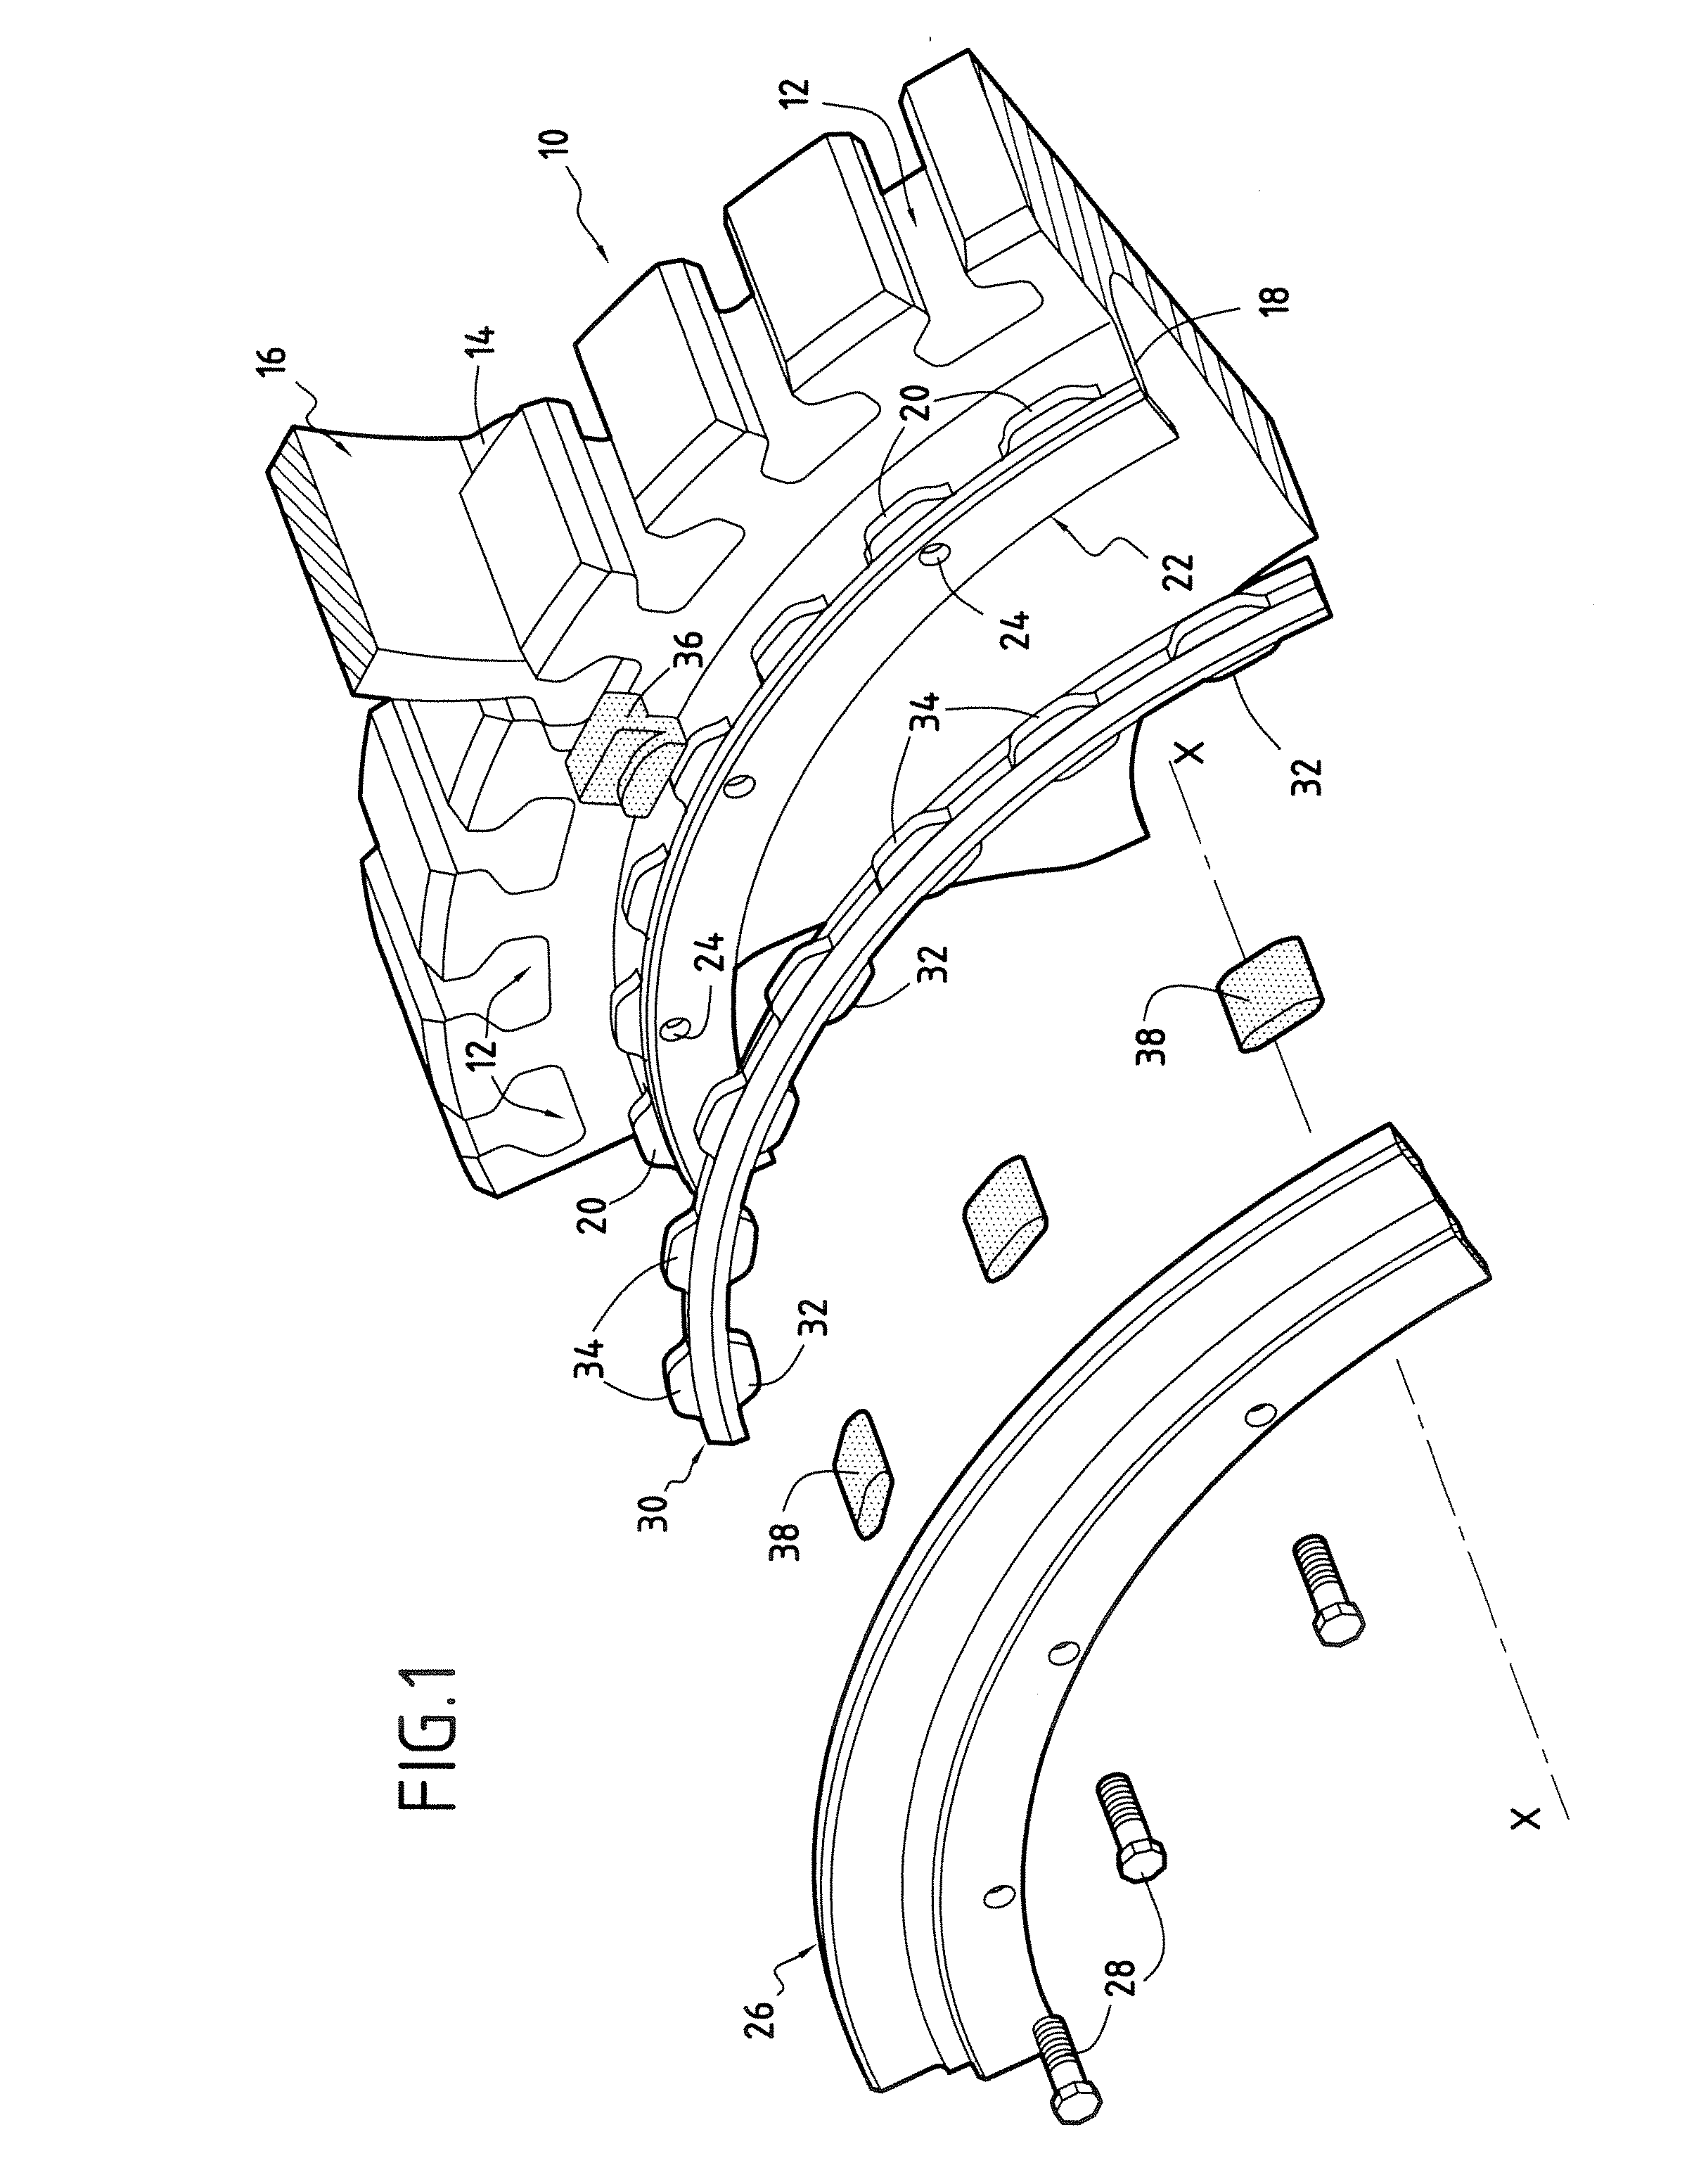 A device for damping vibration of a ring for axially retaining turbomachine fan blades